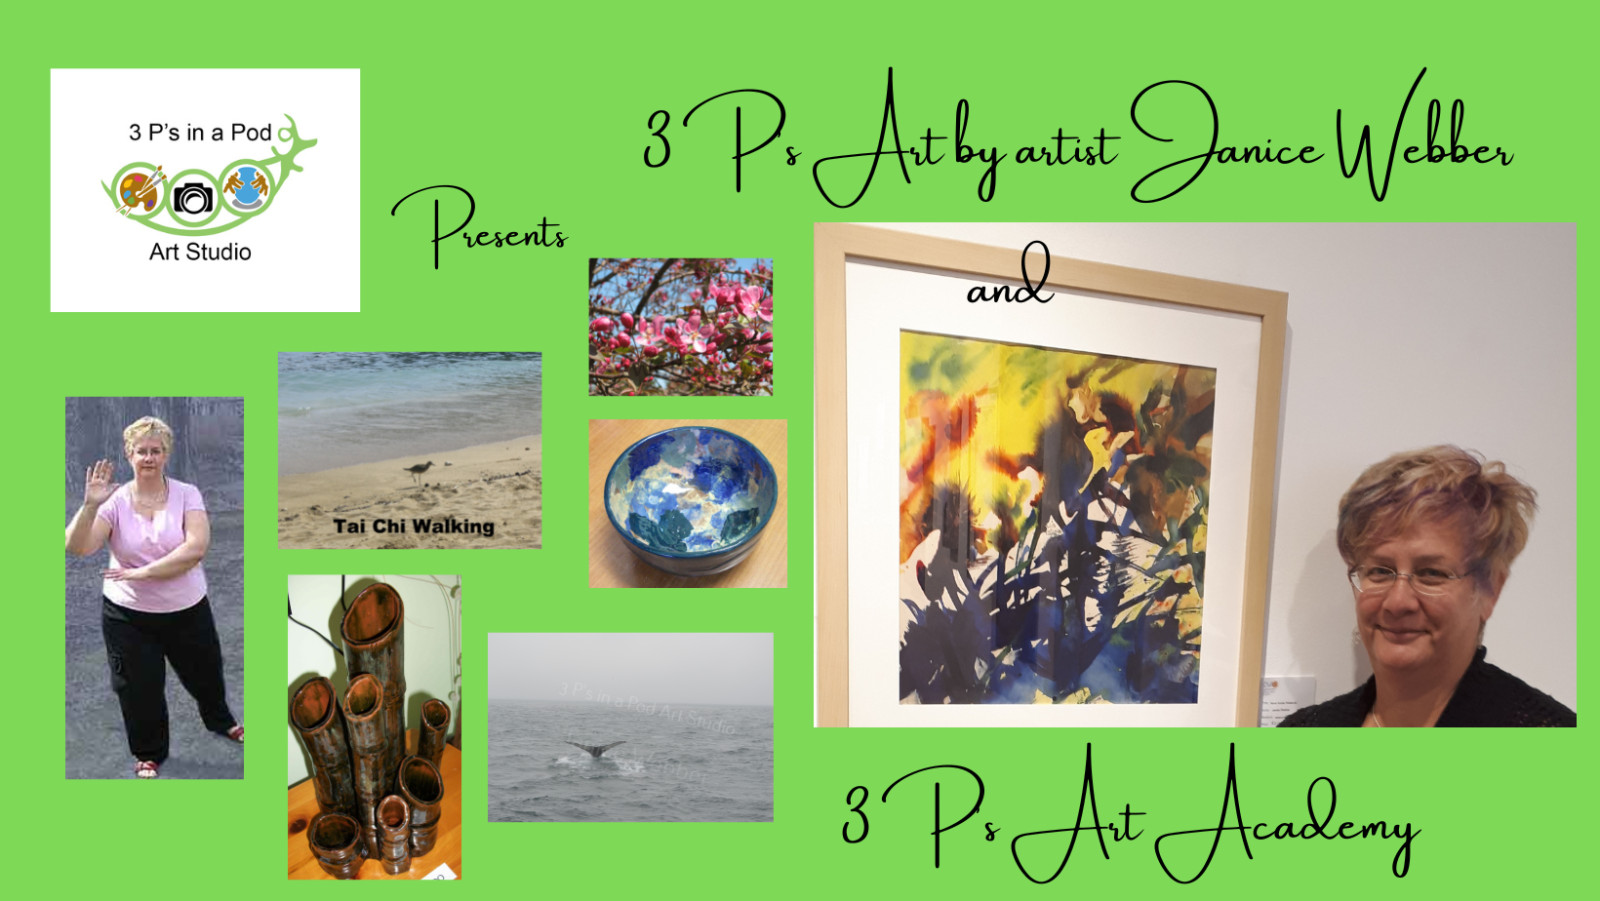 What's new at 3 P's in a Pod Art Studio - part 4